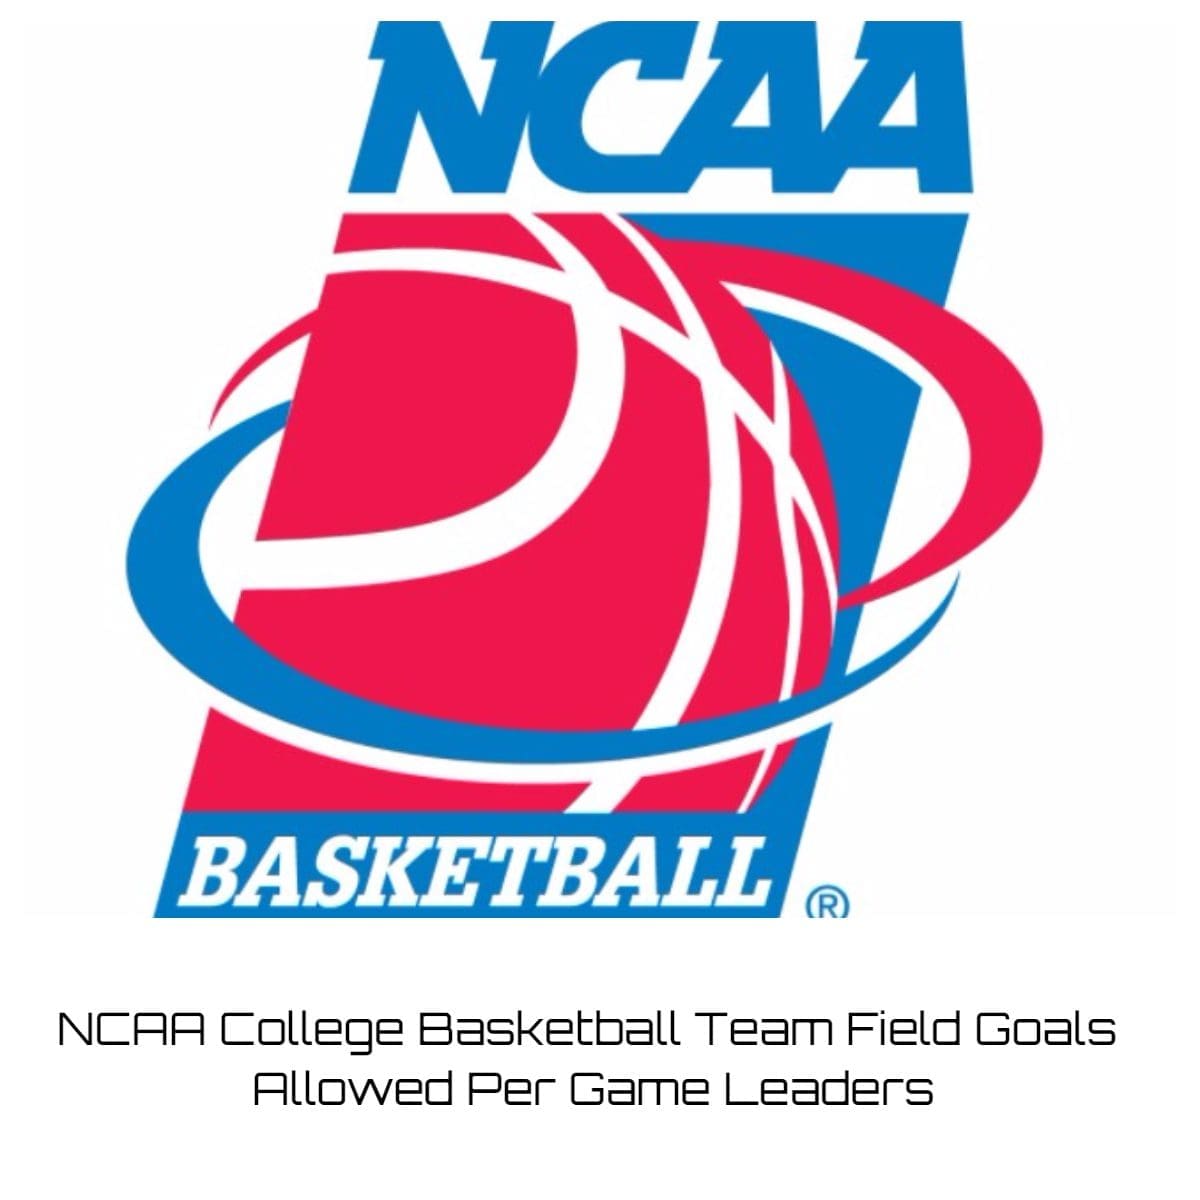 NCAA College Basketball Team Field Goals Allowed Per Game Leaders